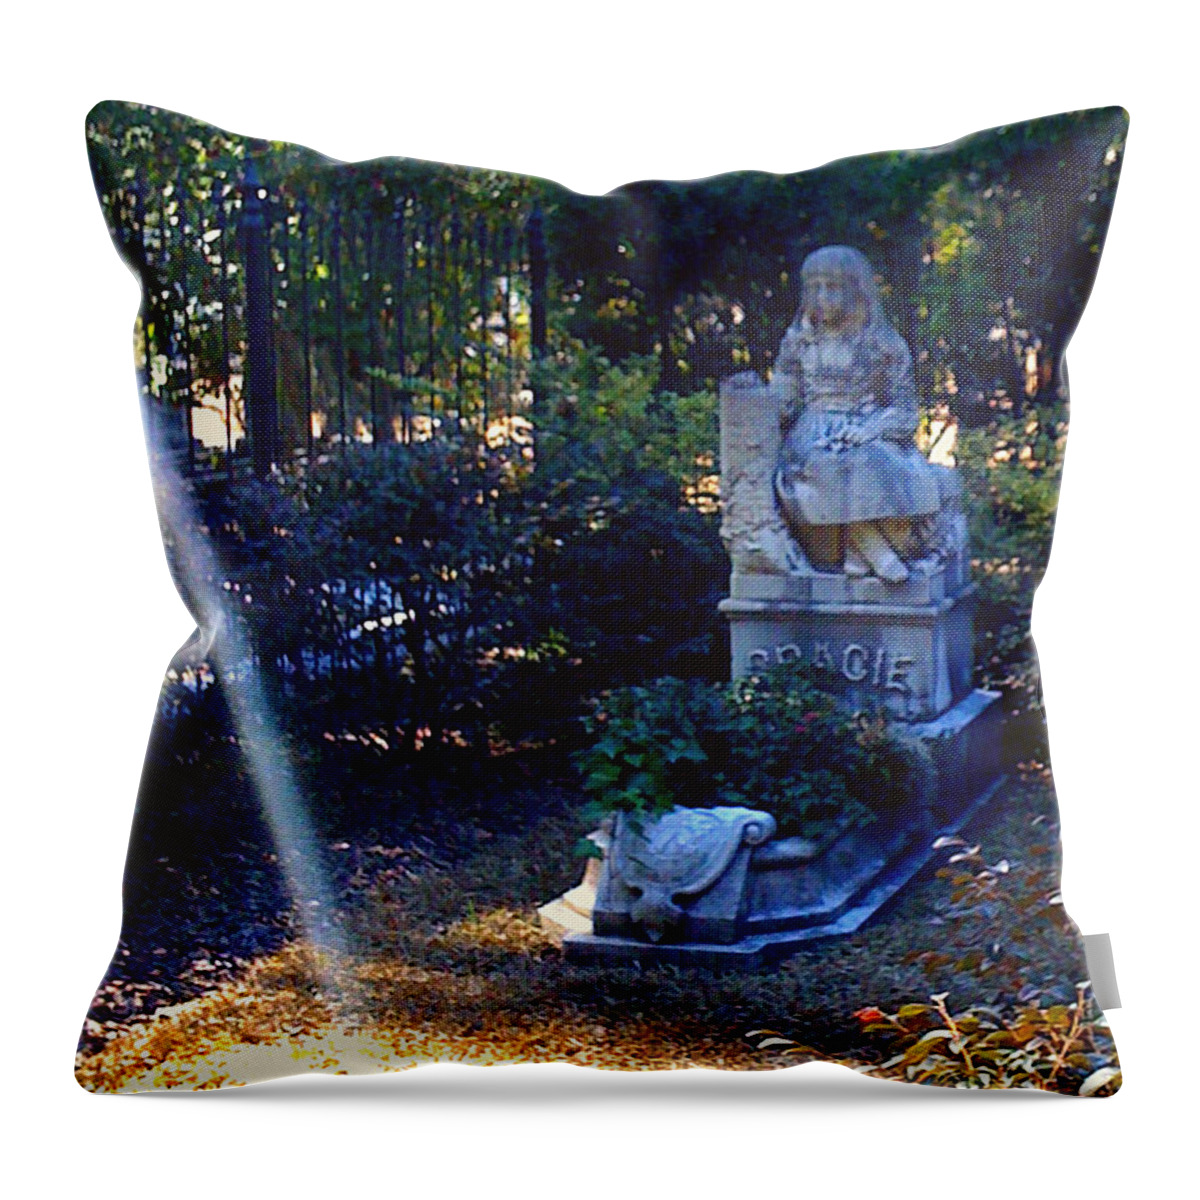 Gracie Throw Pillow featuring the photograph Little Miss Gracie Greeting Me With a Beam by Lee Darnell